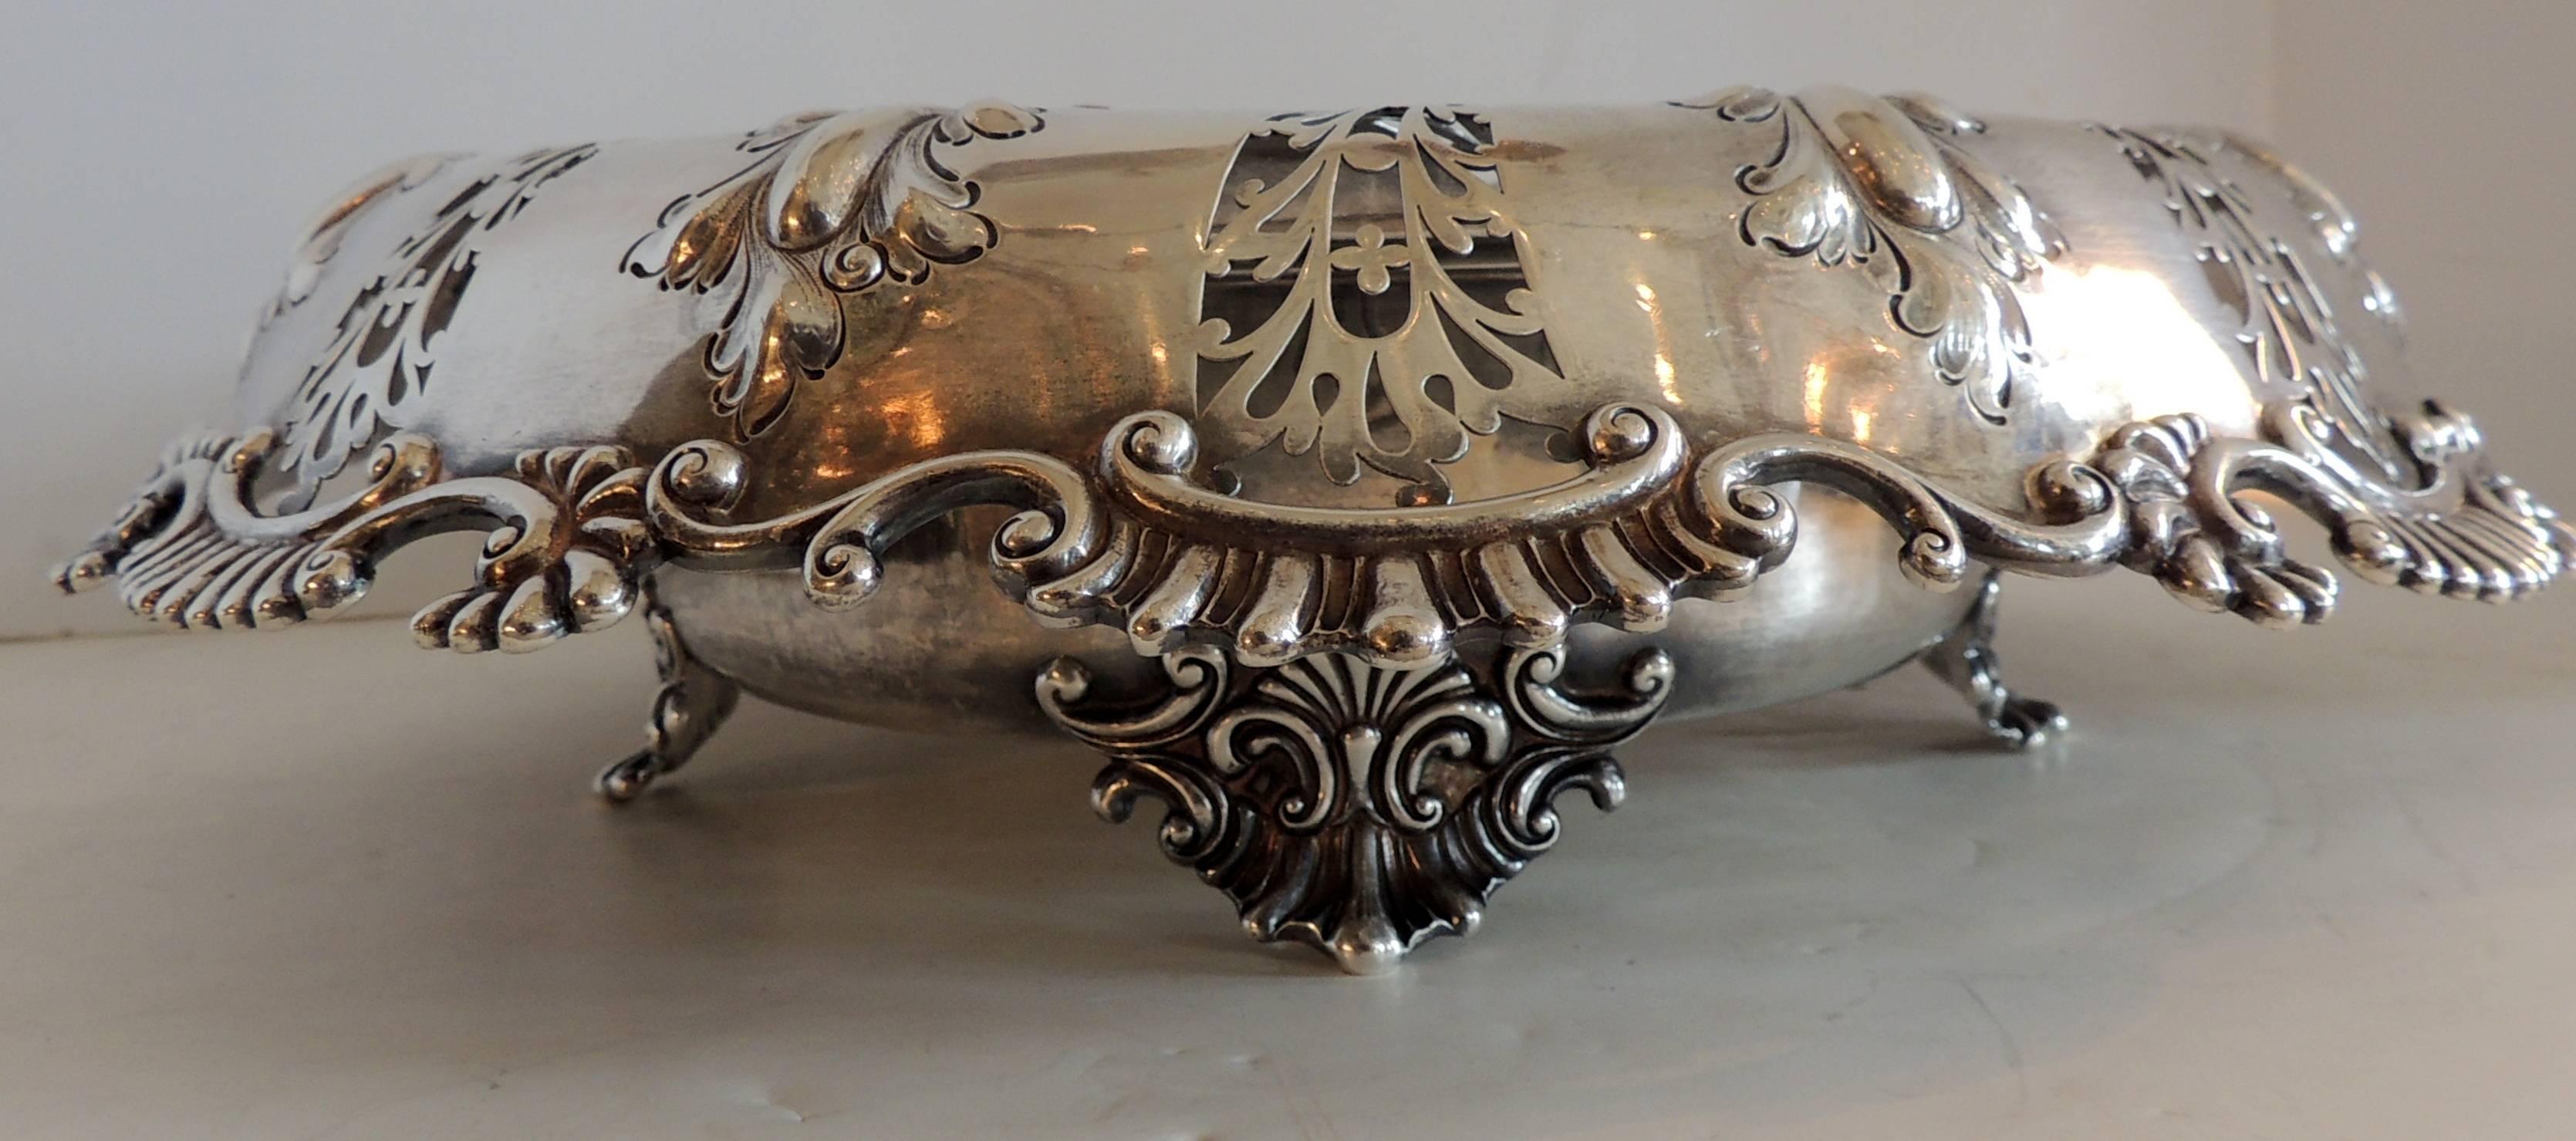 A wonderful Theodore B. Star sterling silver large pierced footed centrepiece bowl.